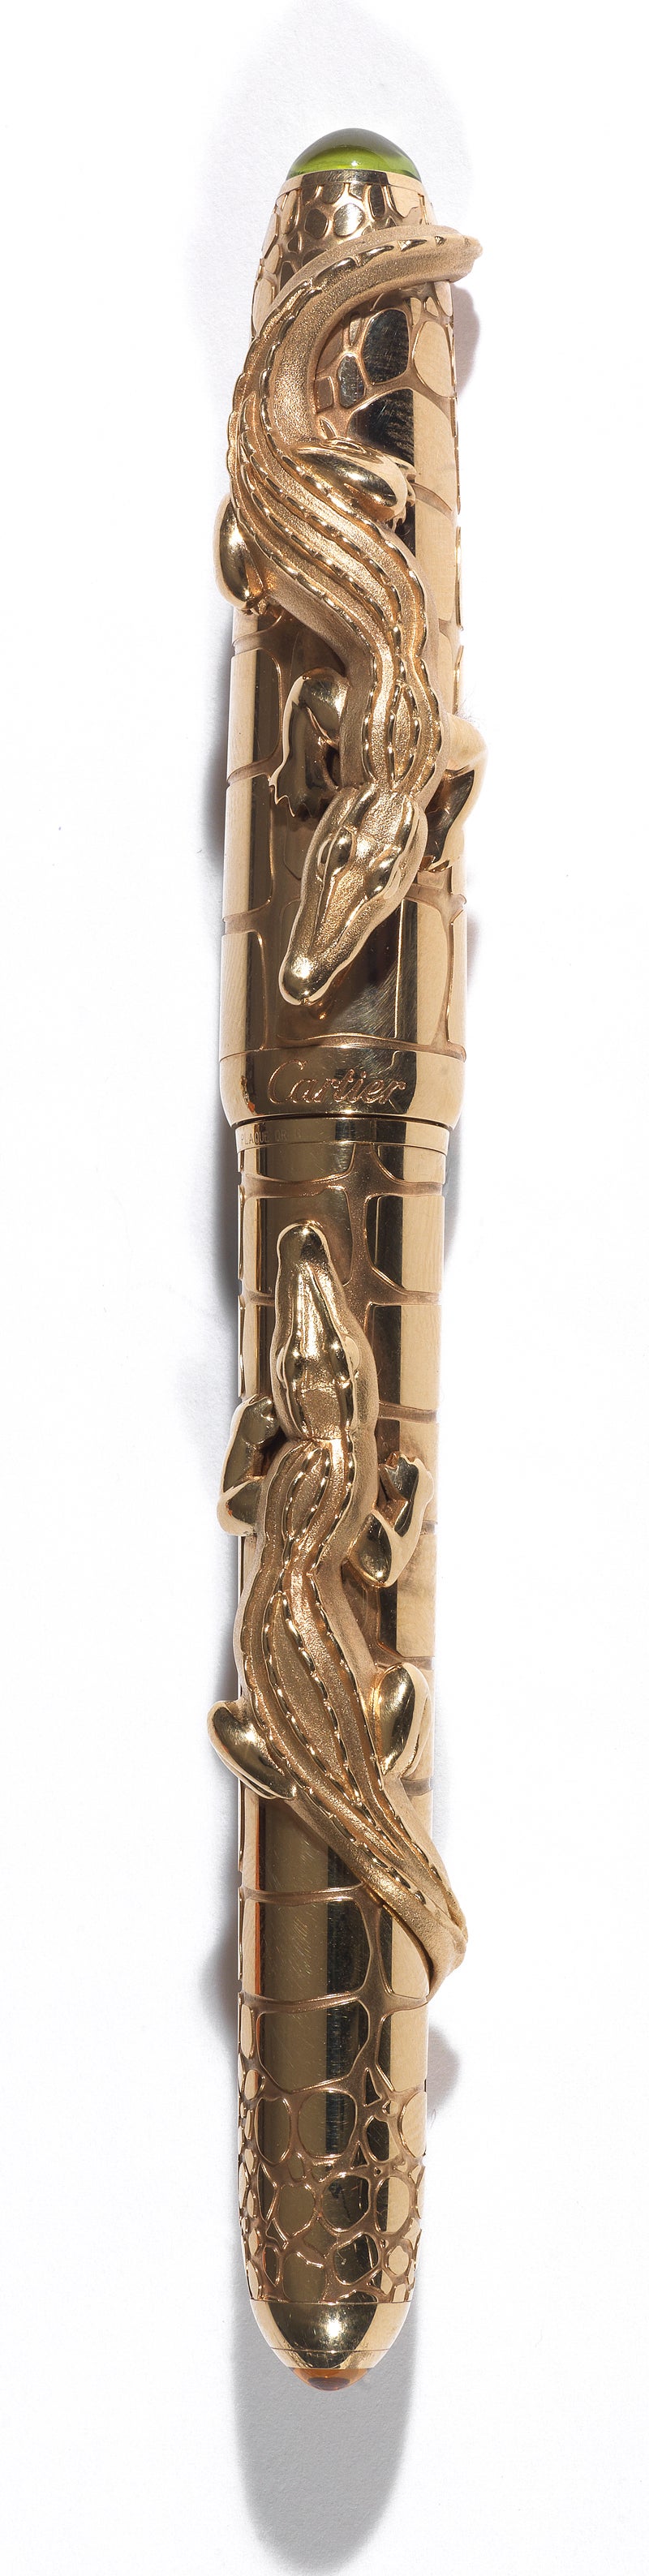 PLEASE NOTE: OUR PRICE IS FULLY INCLUSIVE OF SHIPPING, IMPORTATION TAXES & DUTIES.

This exceptional gold-plated fountain pen depicts two exquisitely wrought crocodiles atop a barrel textured after crocodile hide. The pen is set with brilliant